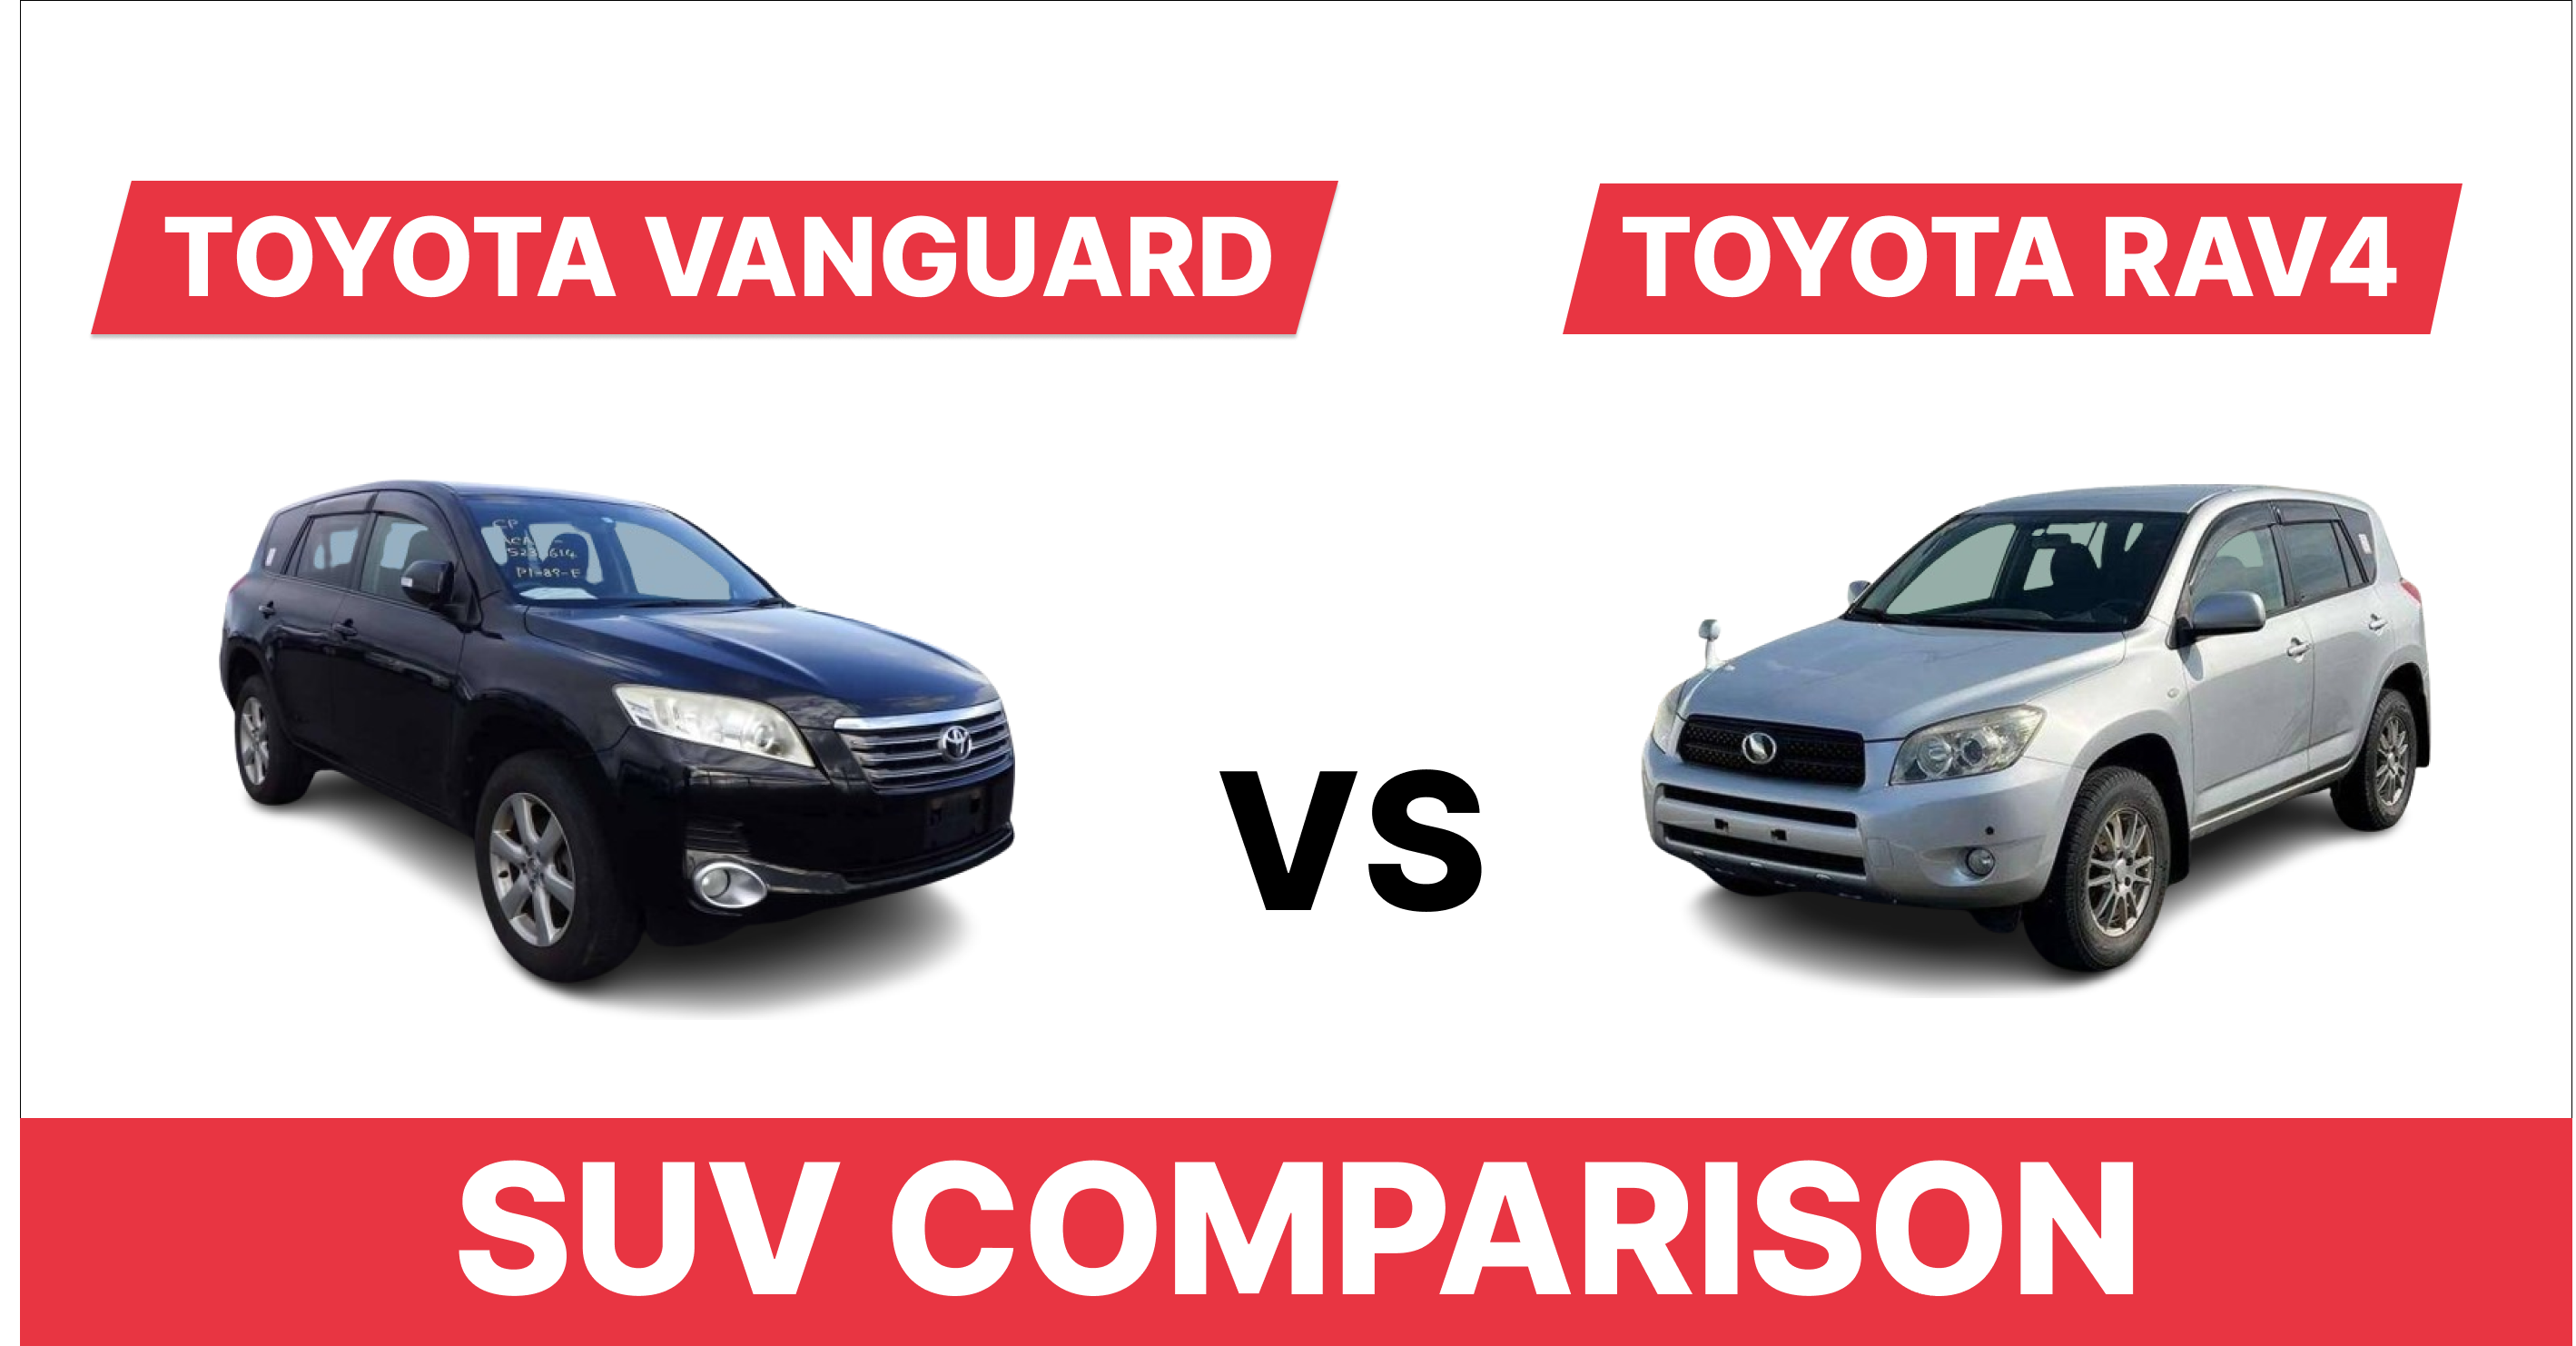 You are currently viewing Toyota Vanguard vs Toyota RAV4: SUV Comparison 